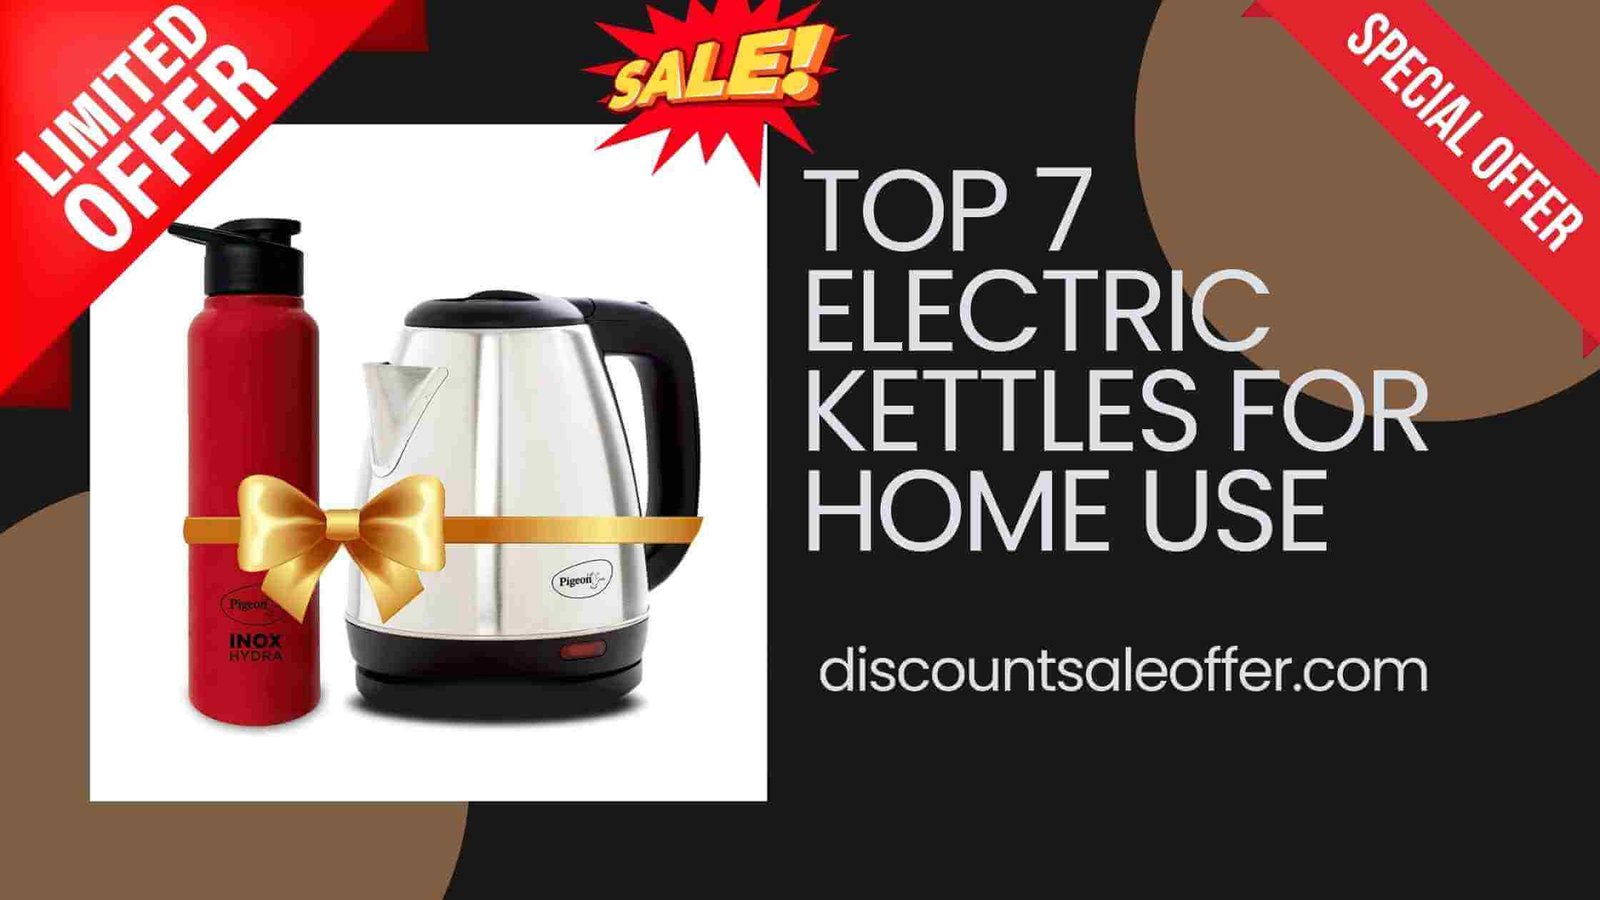 Top 7 Electric Kettles for Home Use